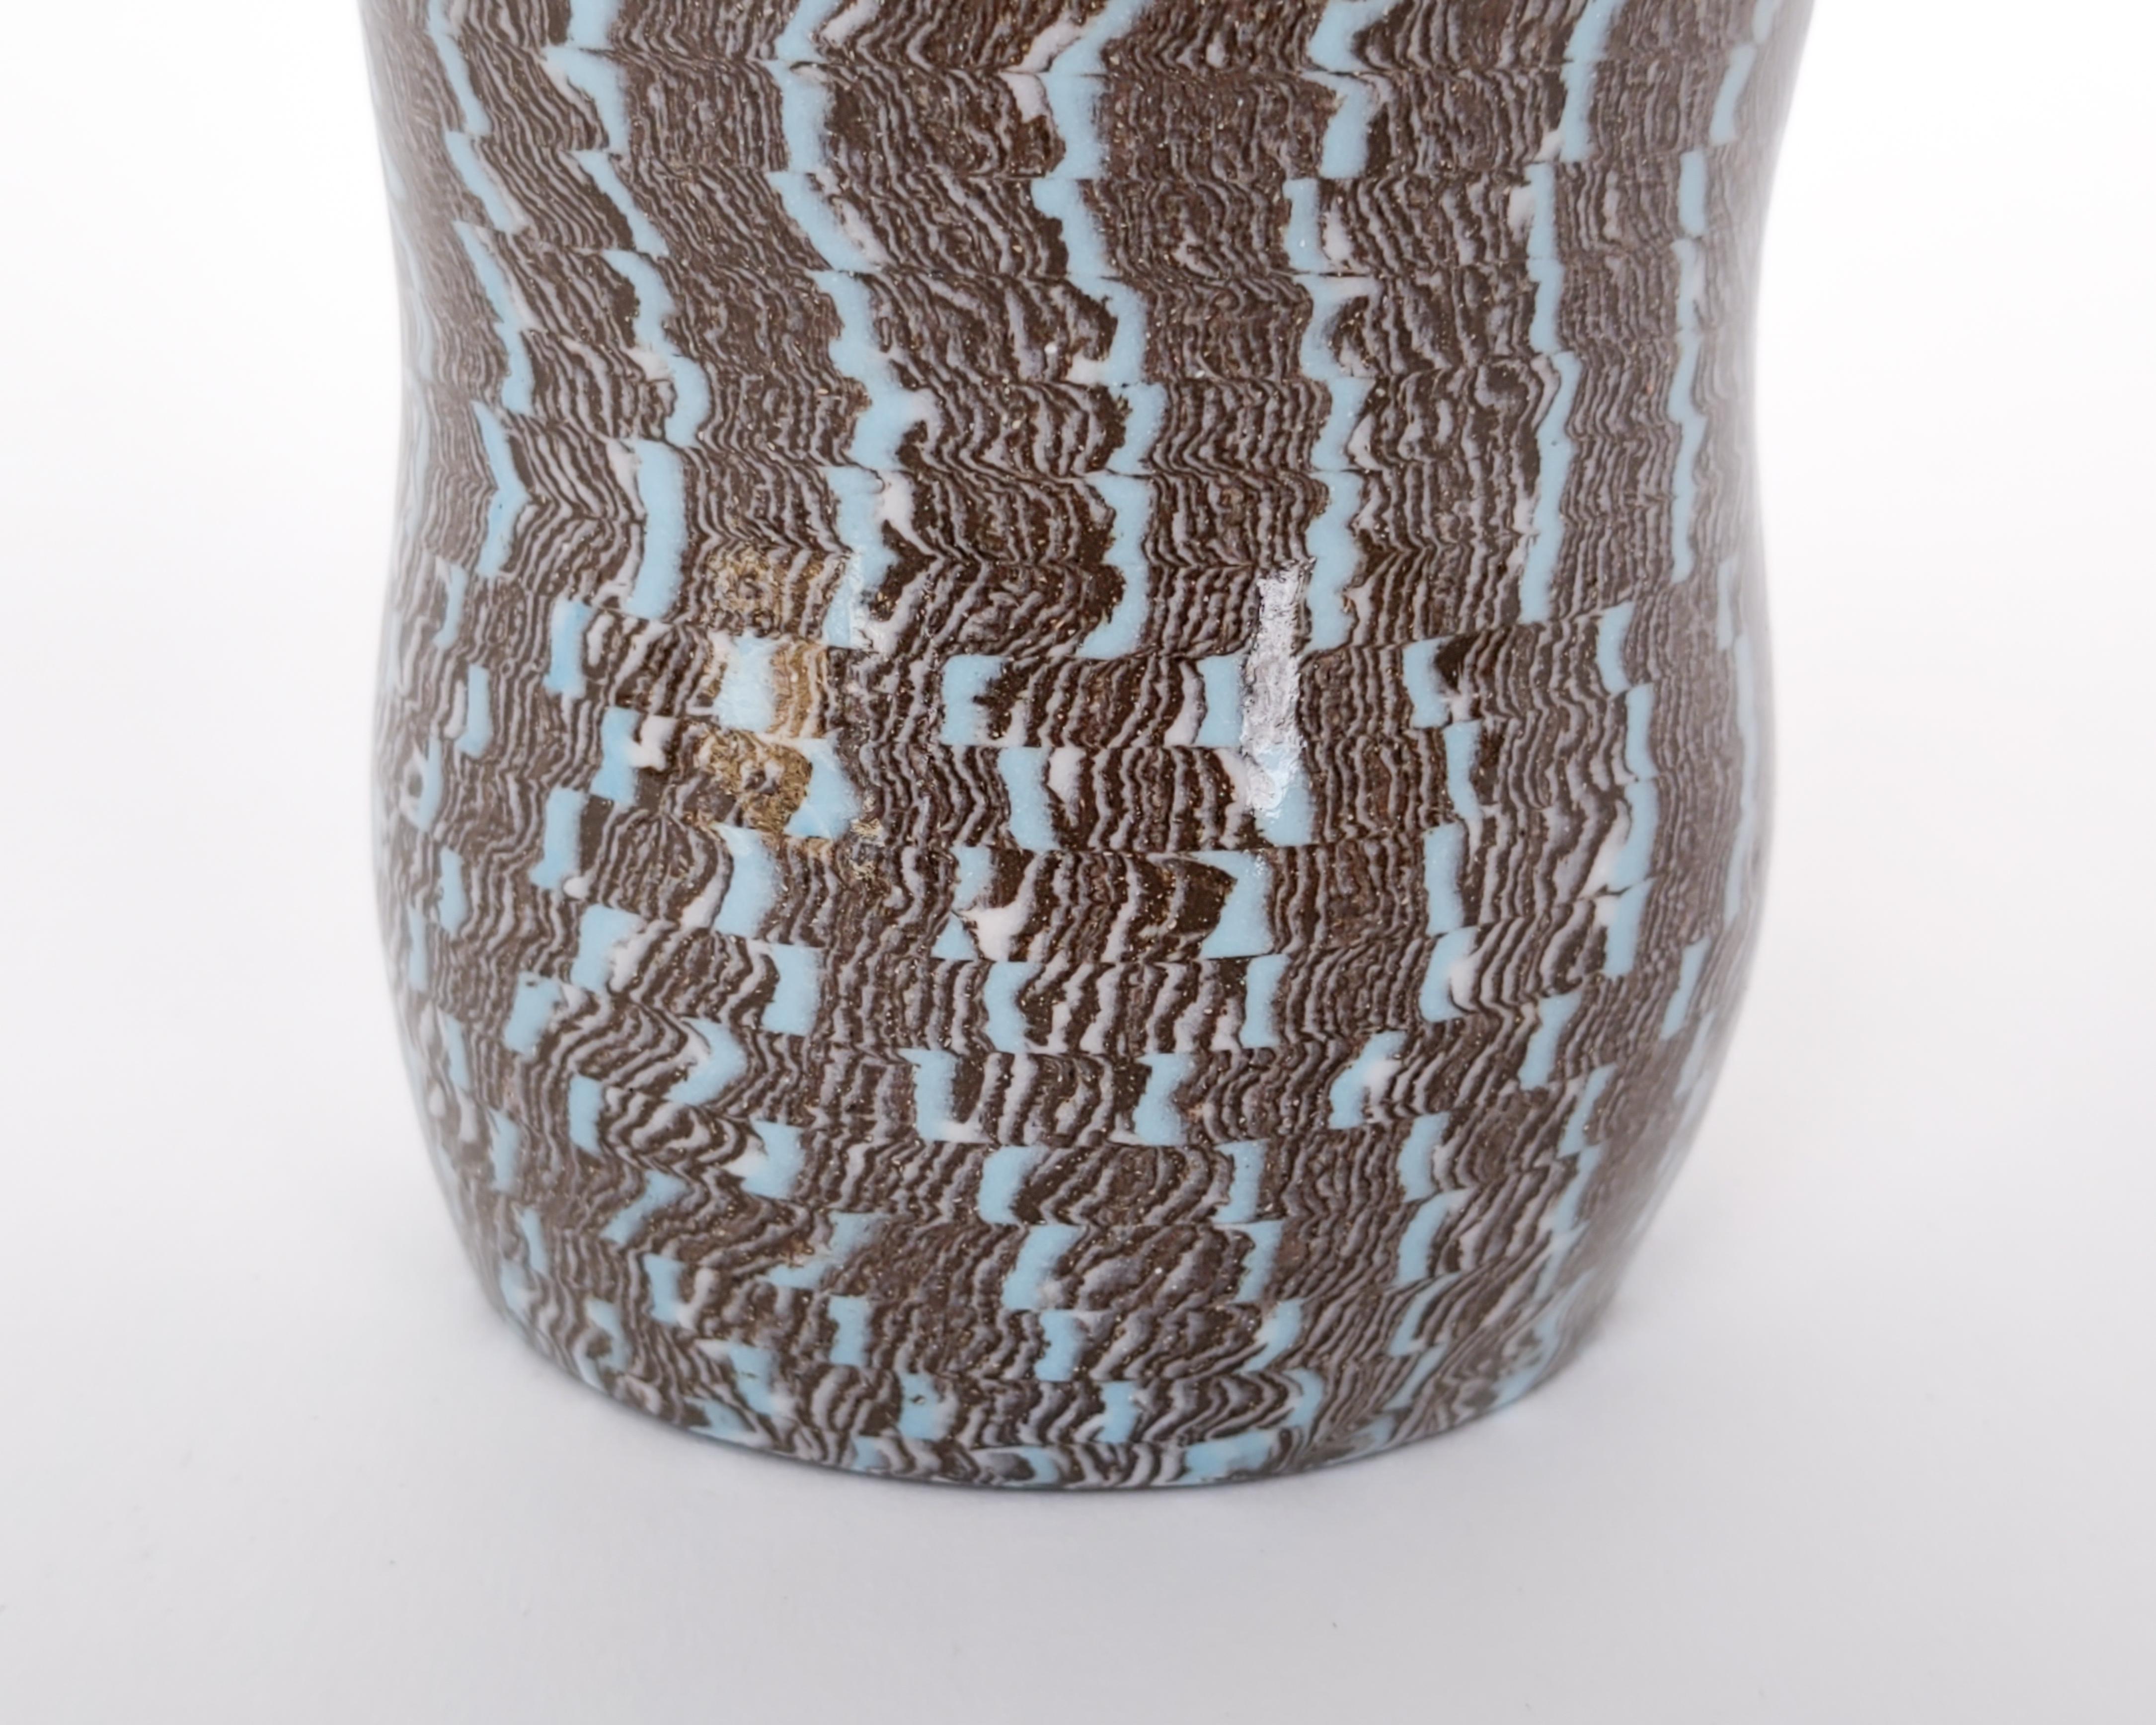 Hand-Crafted Handmade Ceramic Nerikomi Tri-Color Peanut Vase with Sky Blue Accent For Sale